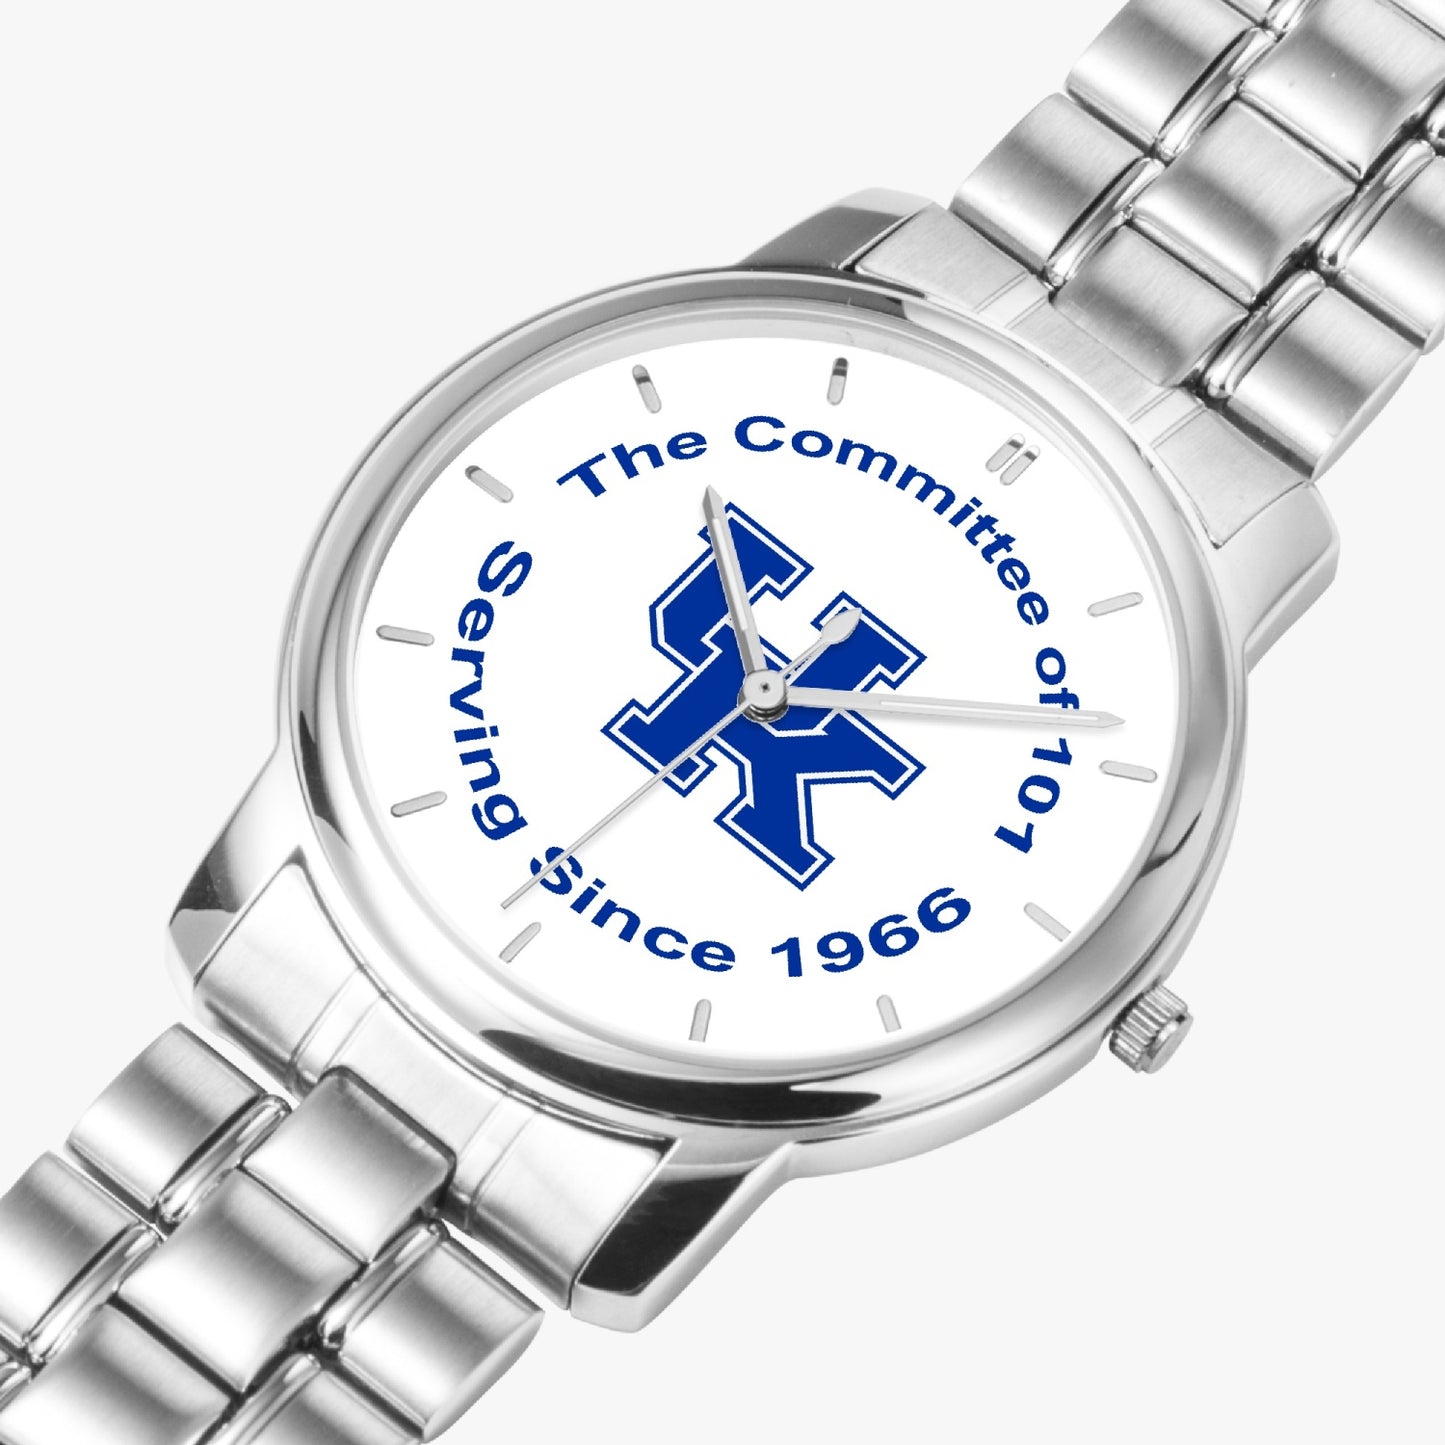 "The Stoll" - The Committee of 101 Steel Strap Battery Watch